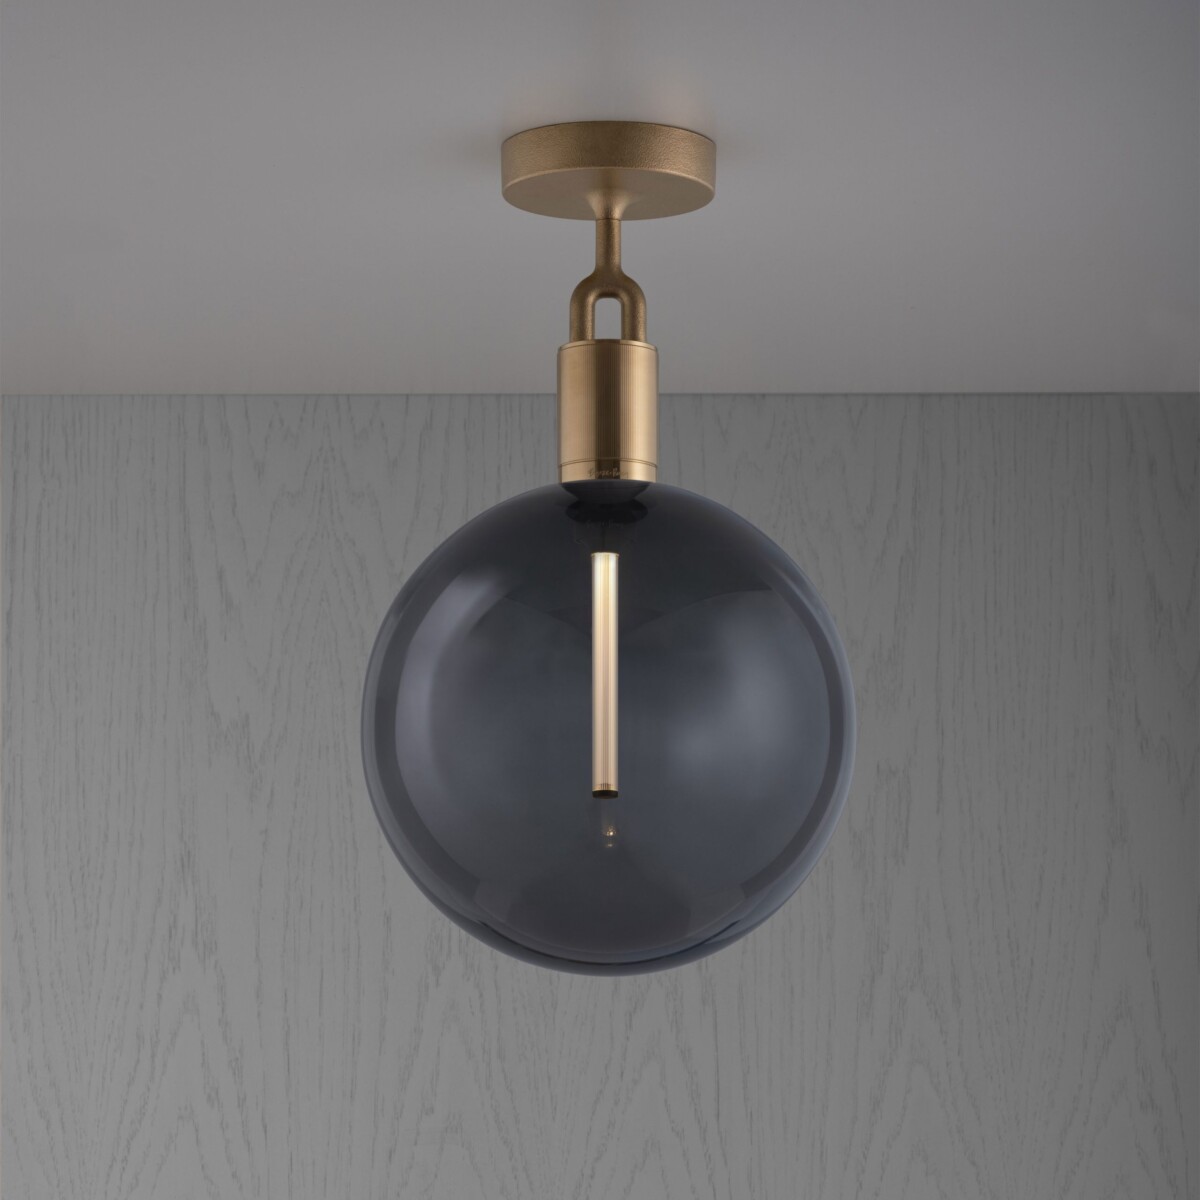 Forked_lighting_Ceiling_Brass_Large_Smoked_Globe_v2_Web-scaled